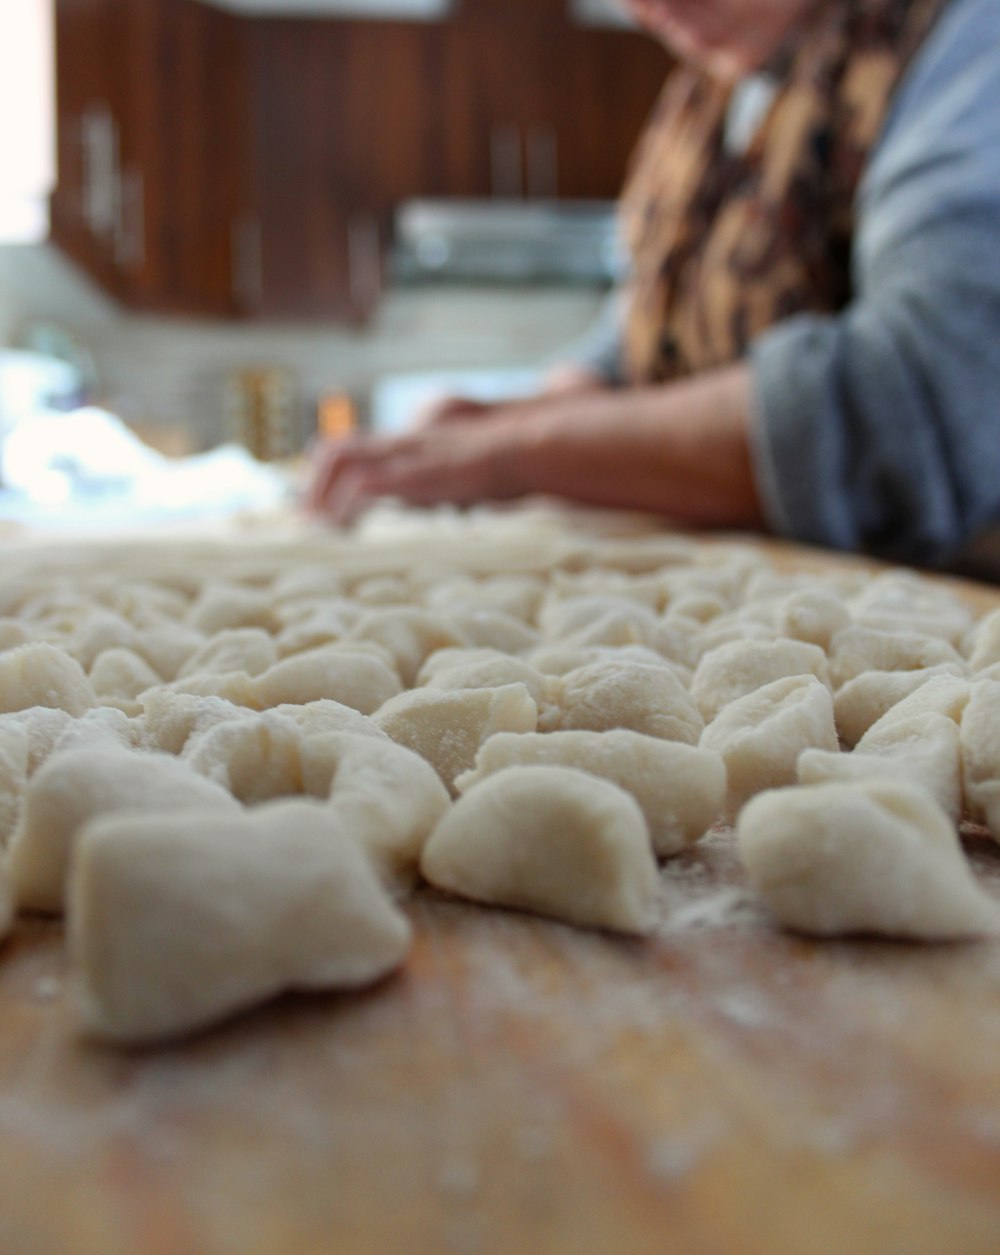 a person is making dumplings on a table